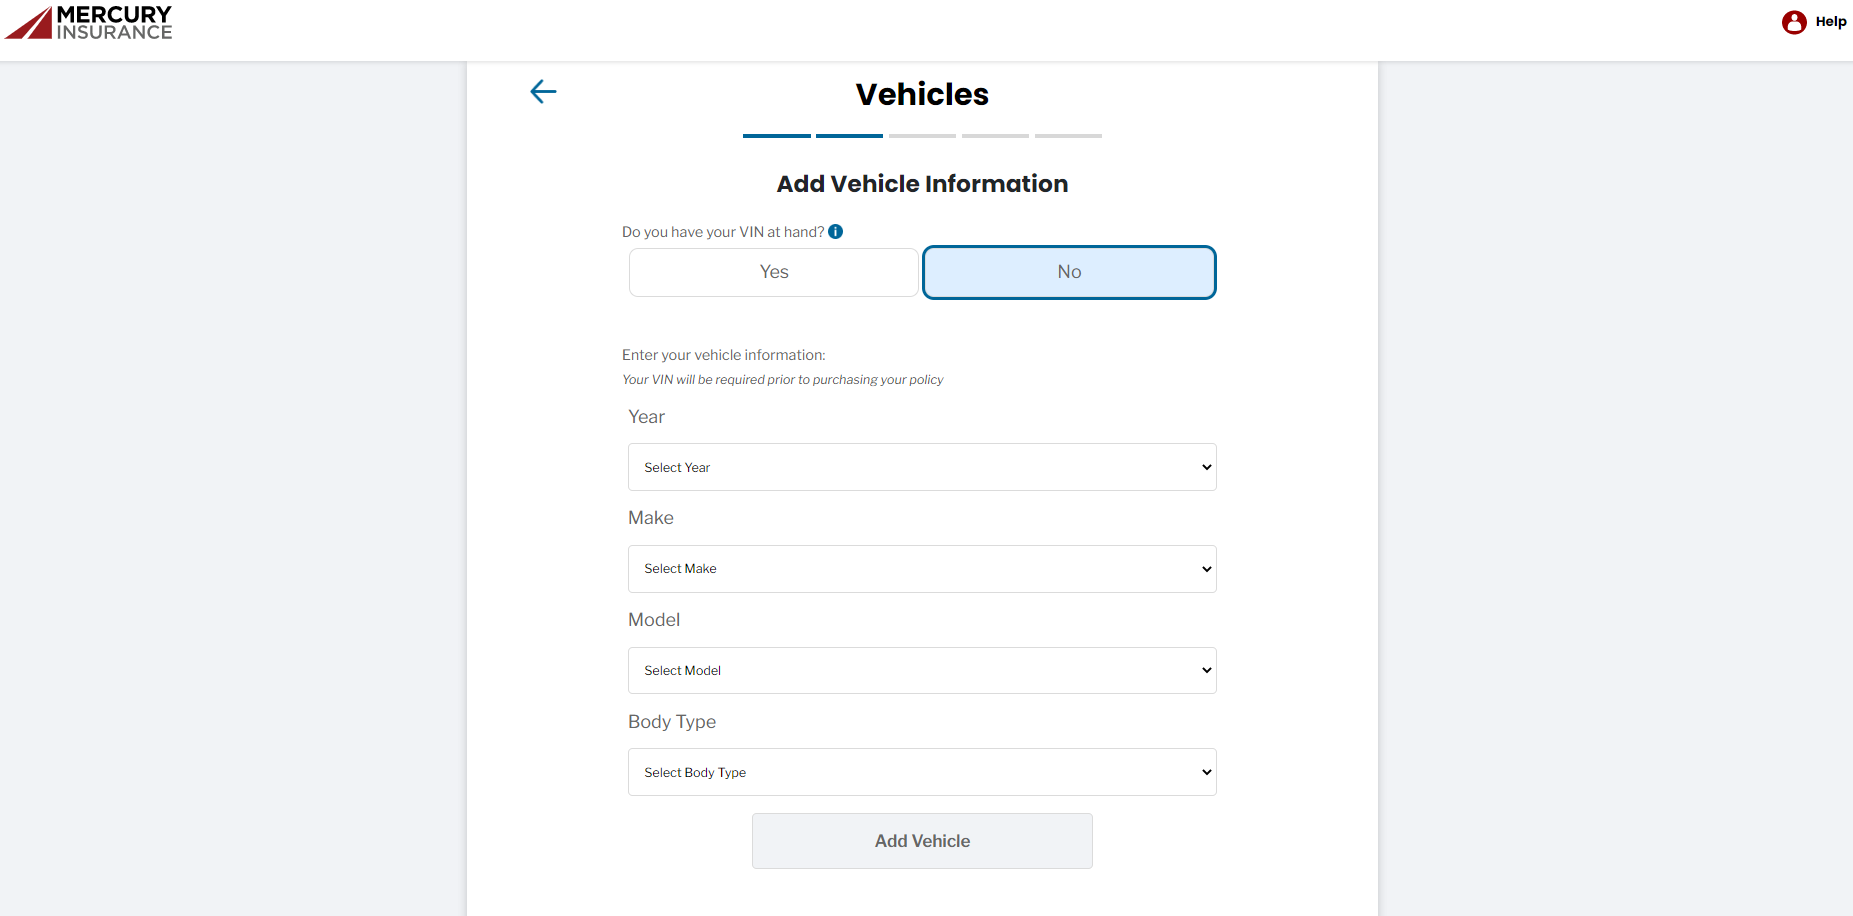 Mercury Insurance quote page requesting vehicle information, including year, make, model, and body type